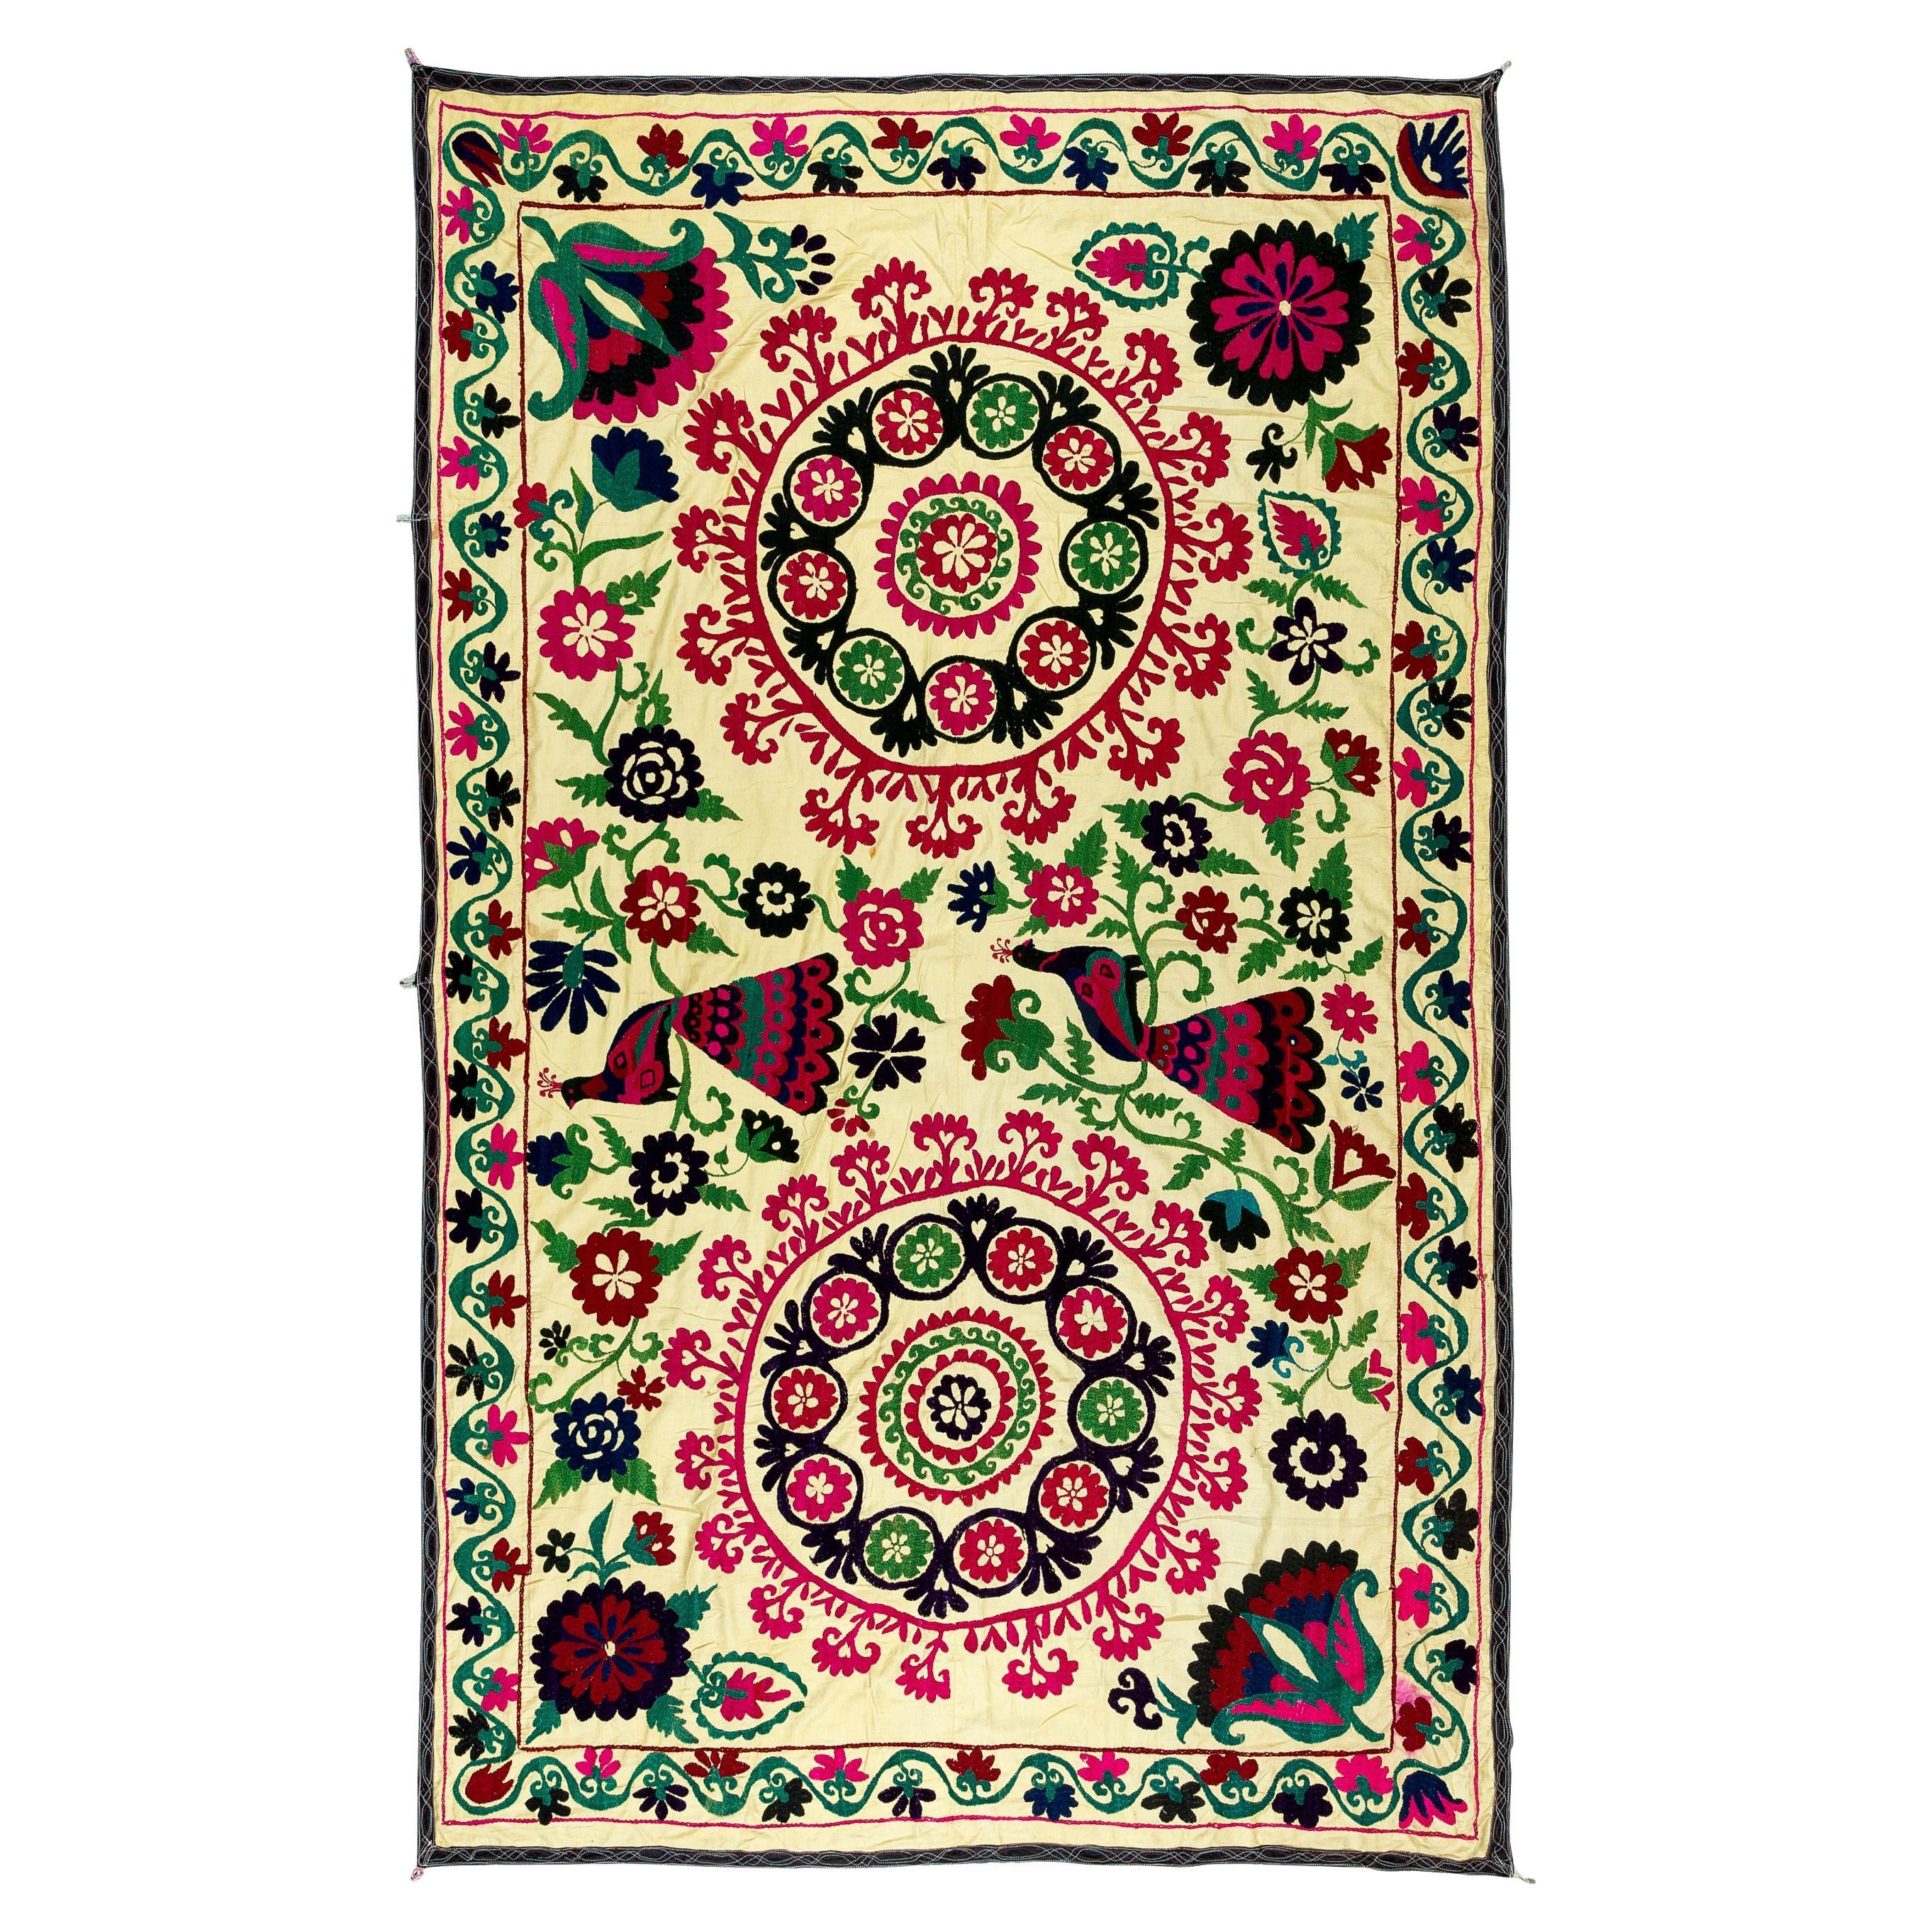 4.7x7.4 Ft Uzbek Silk Hand Embroidery Suzani Bed Cover, Vintage Wall Hanging For Sale